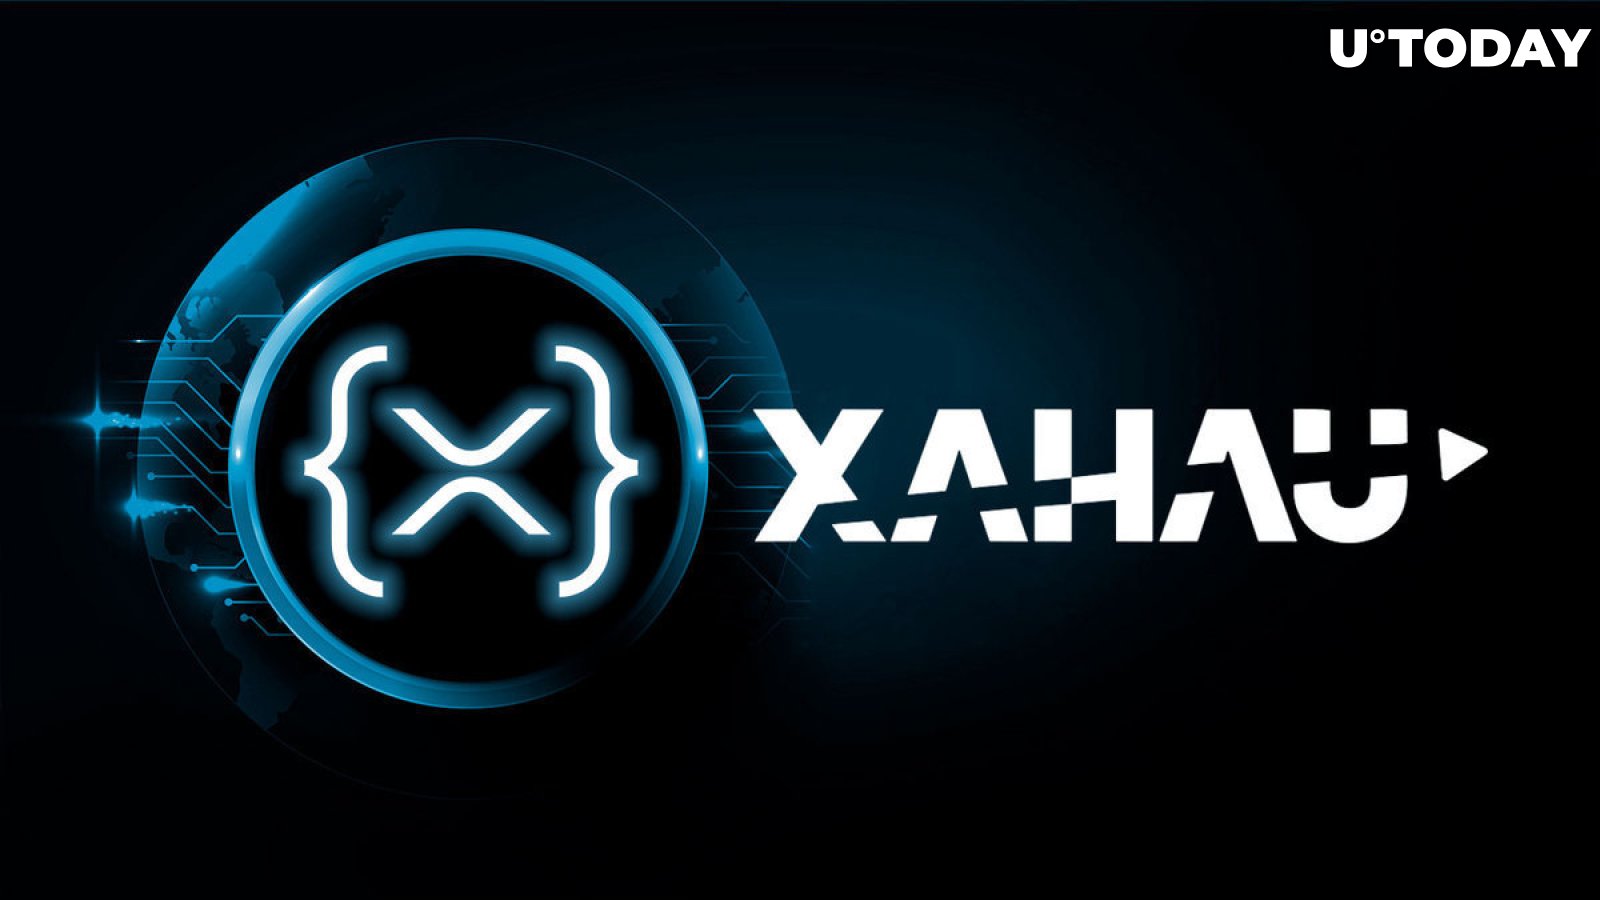 XRP Ledger Set to Boost Interoperability With Upcoming Xahau Feature: Details